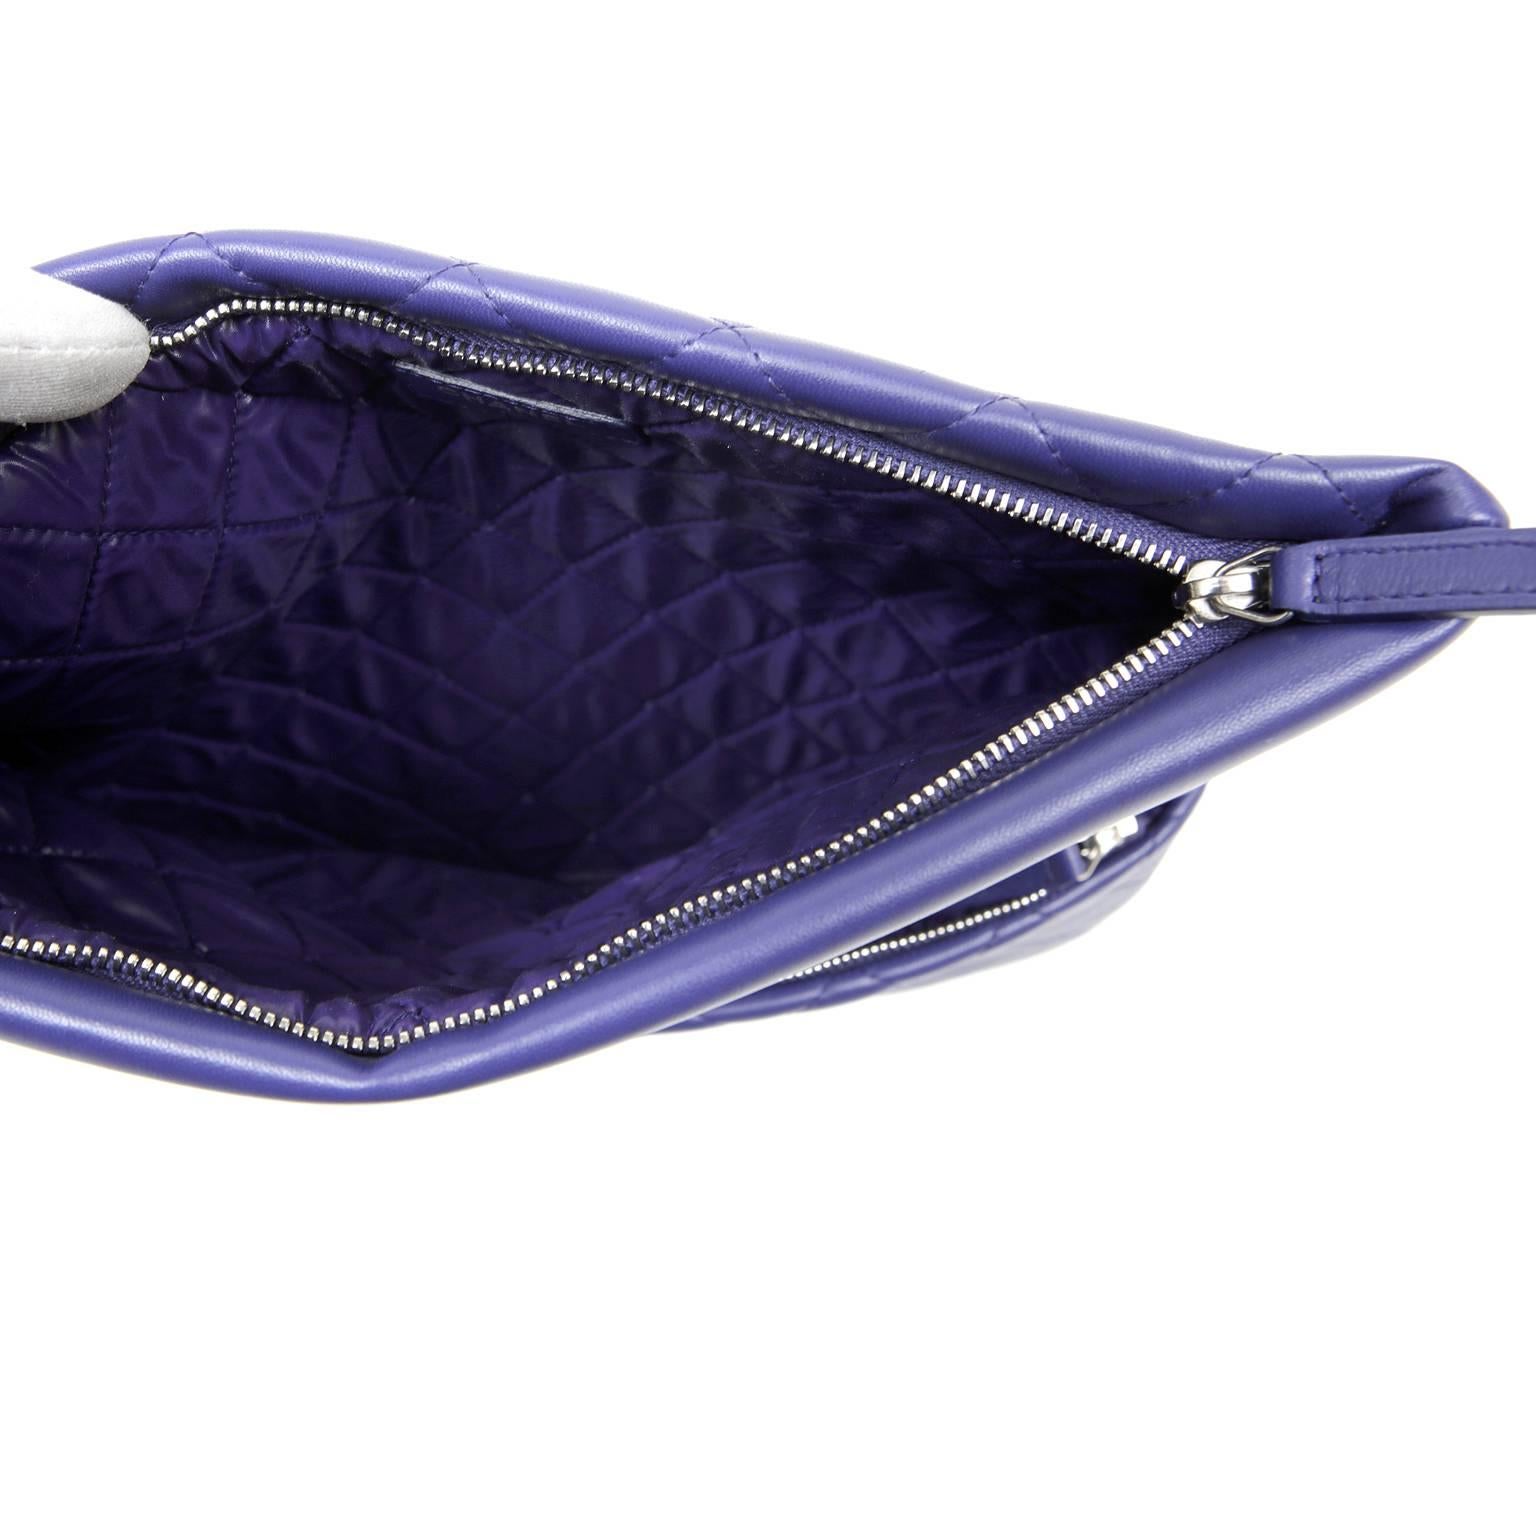 Chanel Purple Quilted Leather Foldover Clutch 1